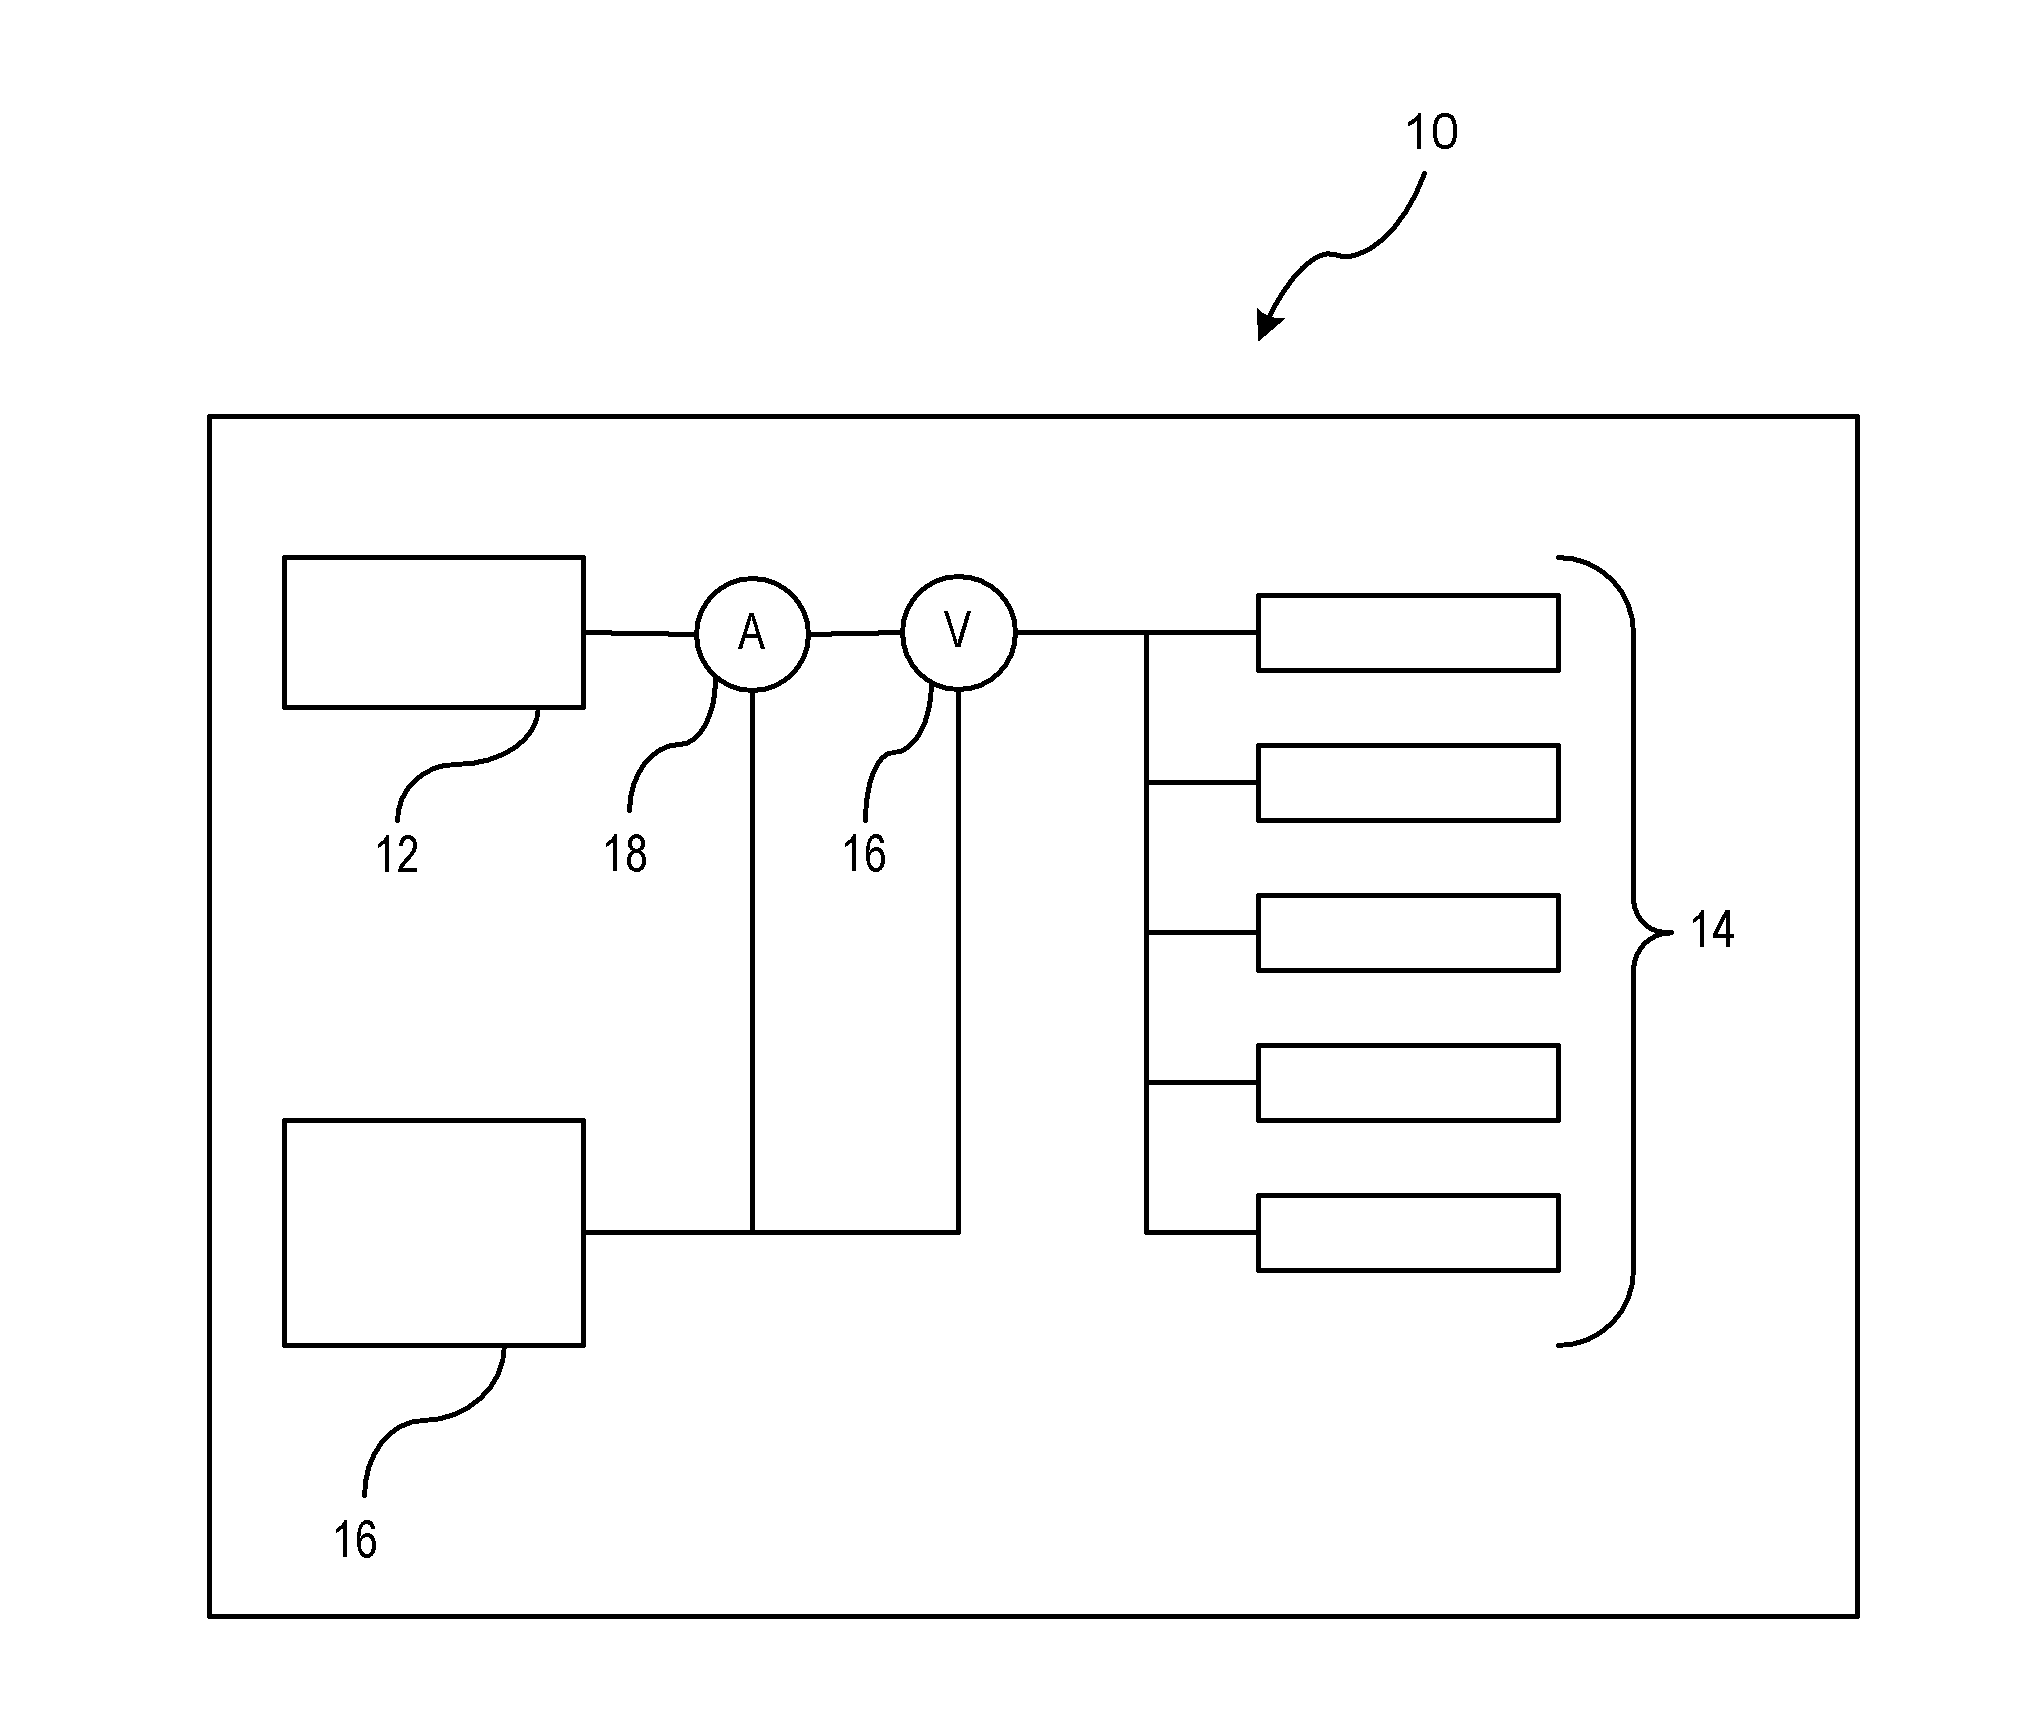 Method and apparatus for estimating soc of a battery